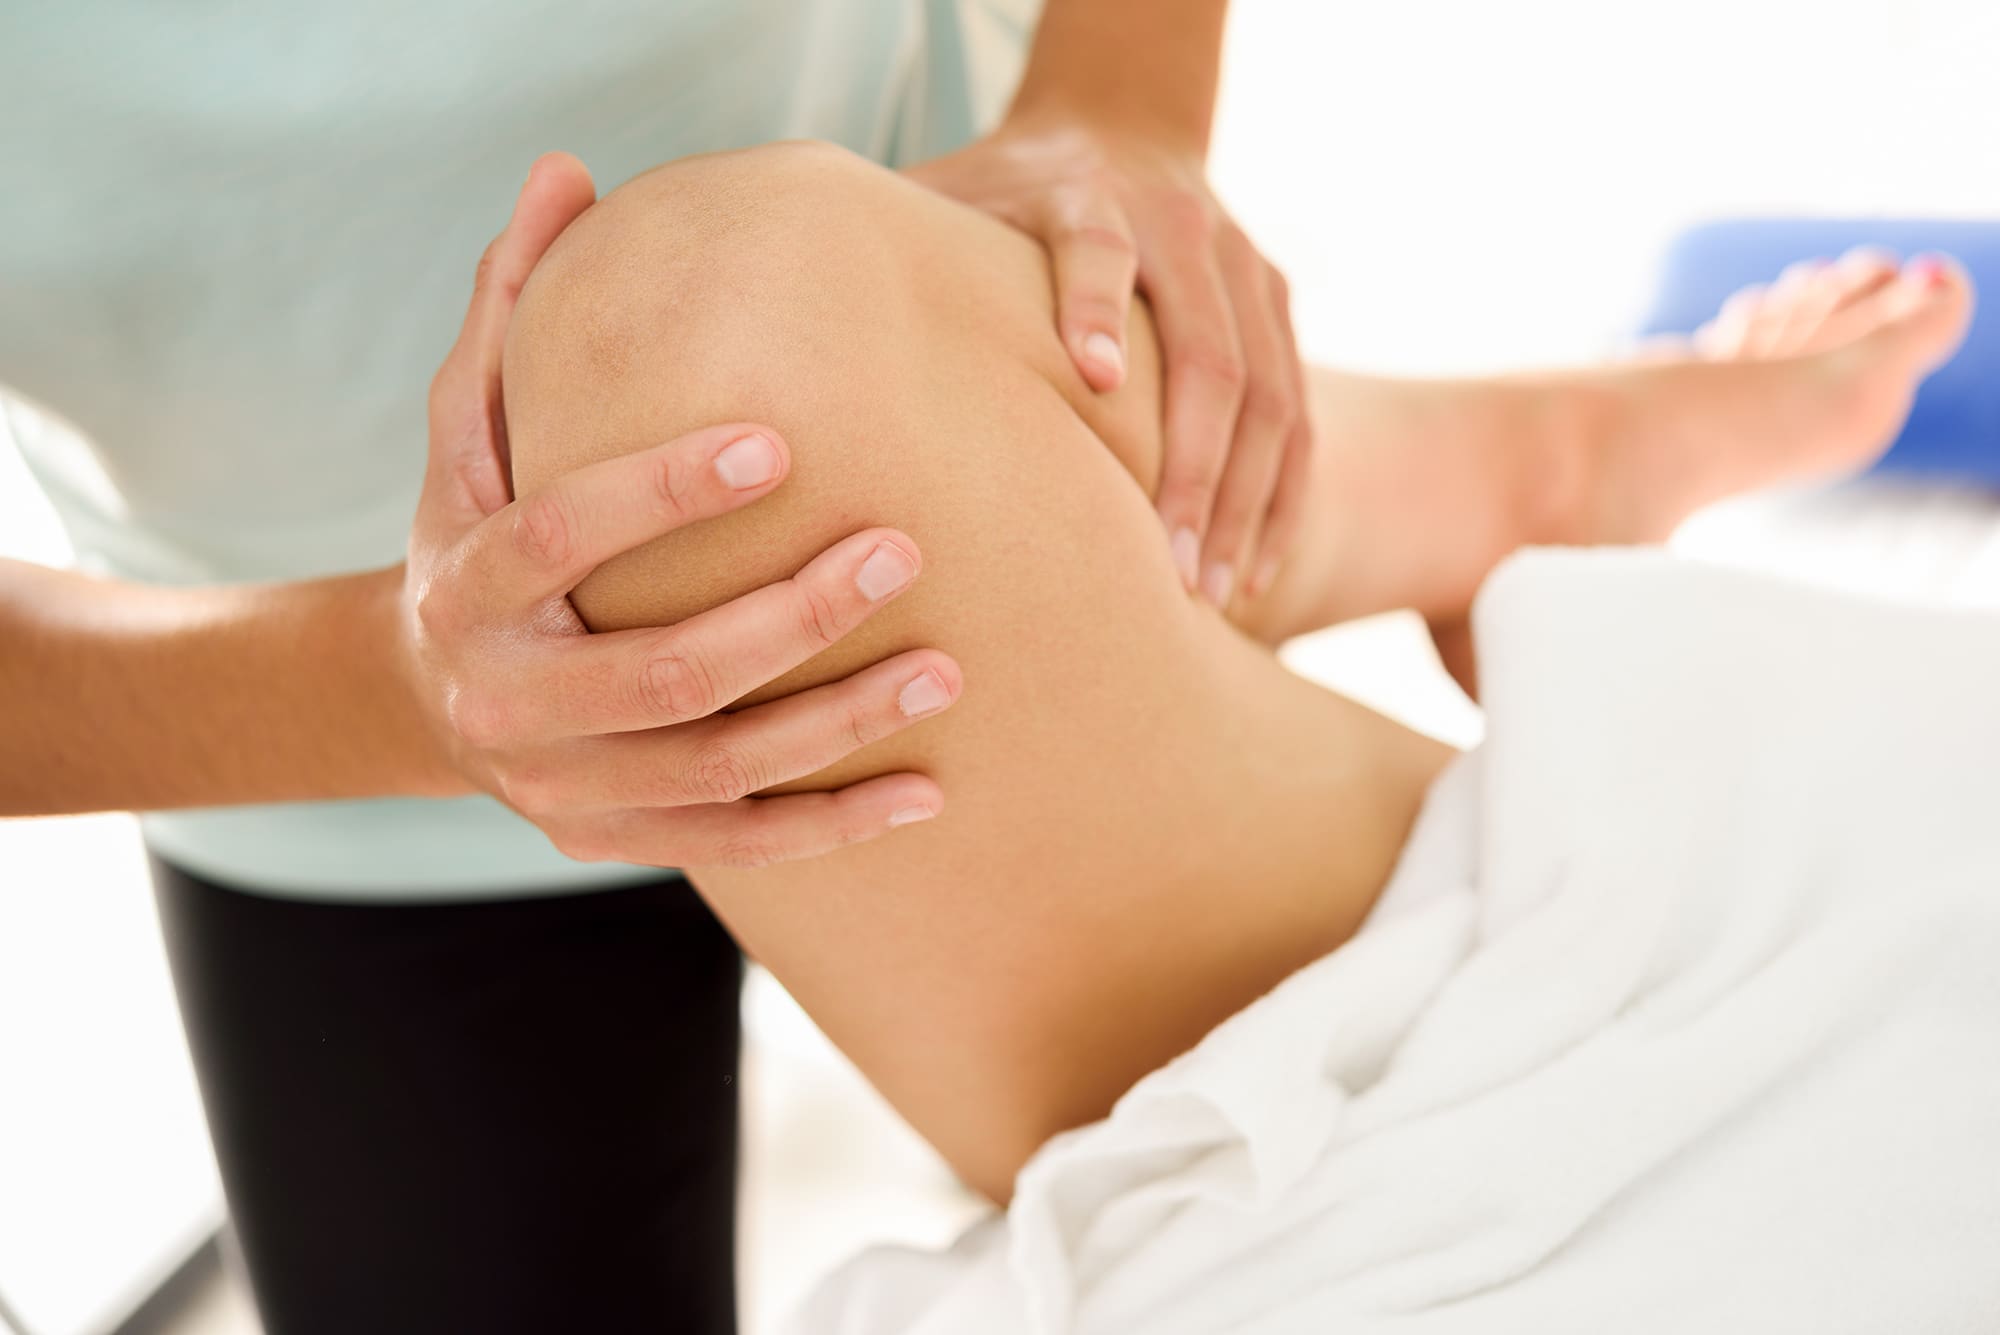 medical-massage-at-the-leg-in-a-physiotherapy-cent-PR92CBU